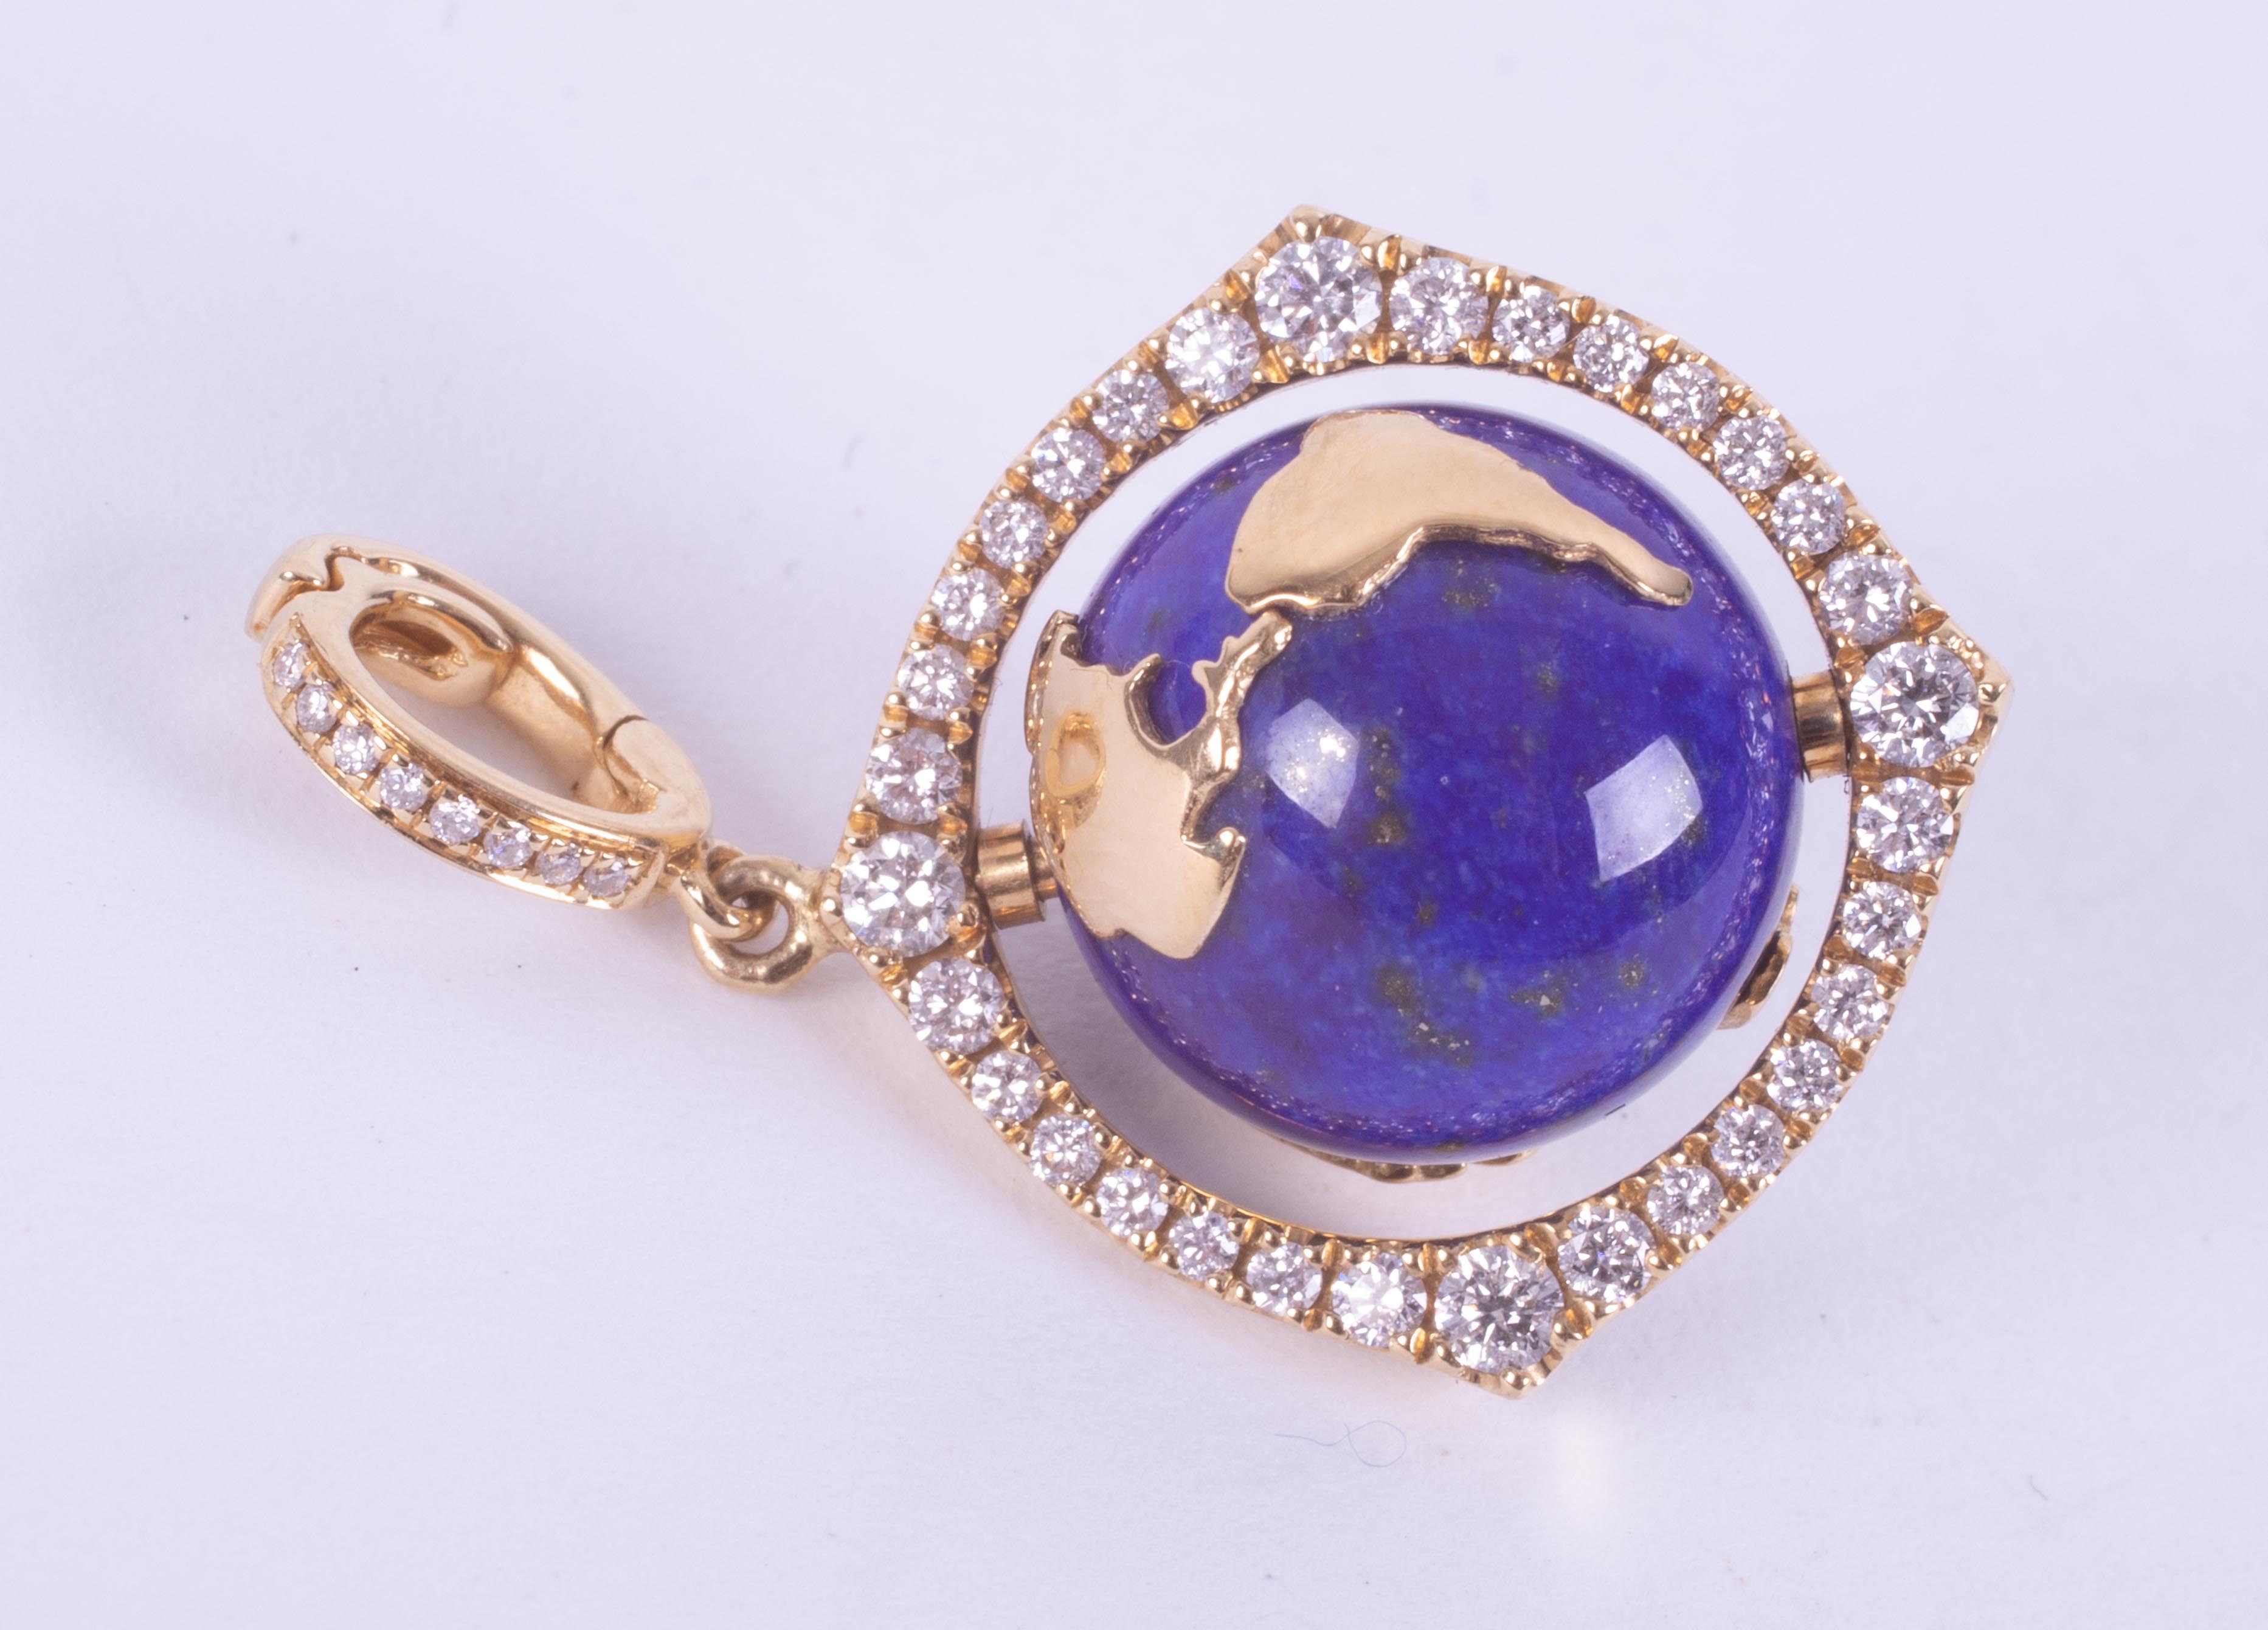 An 18ct yellow gold pendant set with a spinning lapis lazuli & gold 'World' surrounded by small